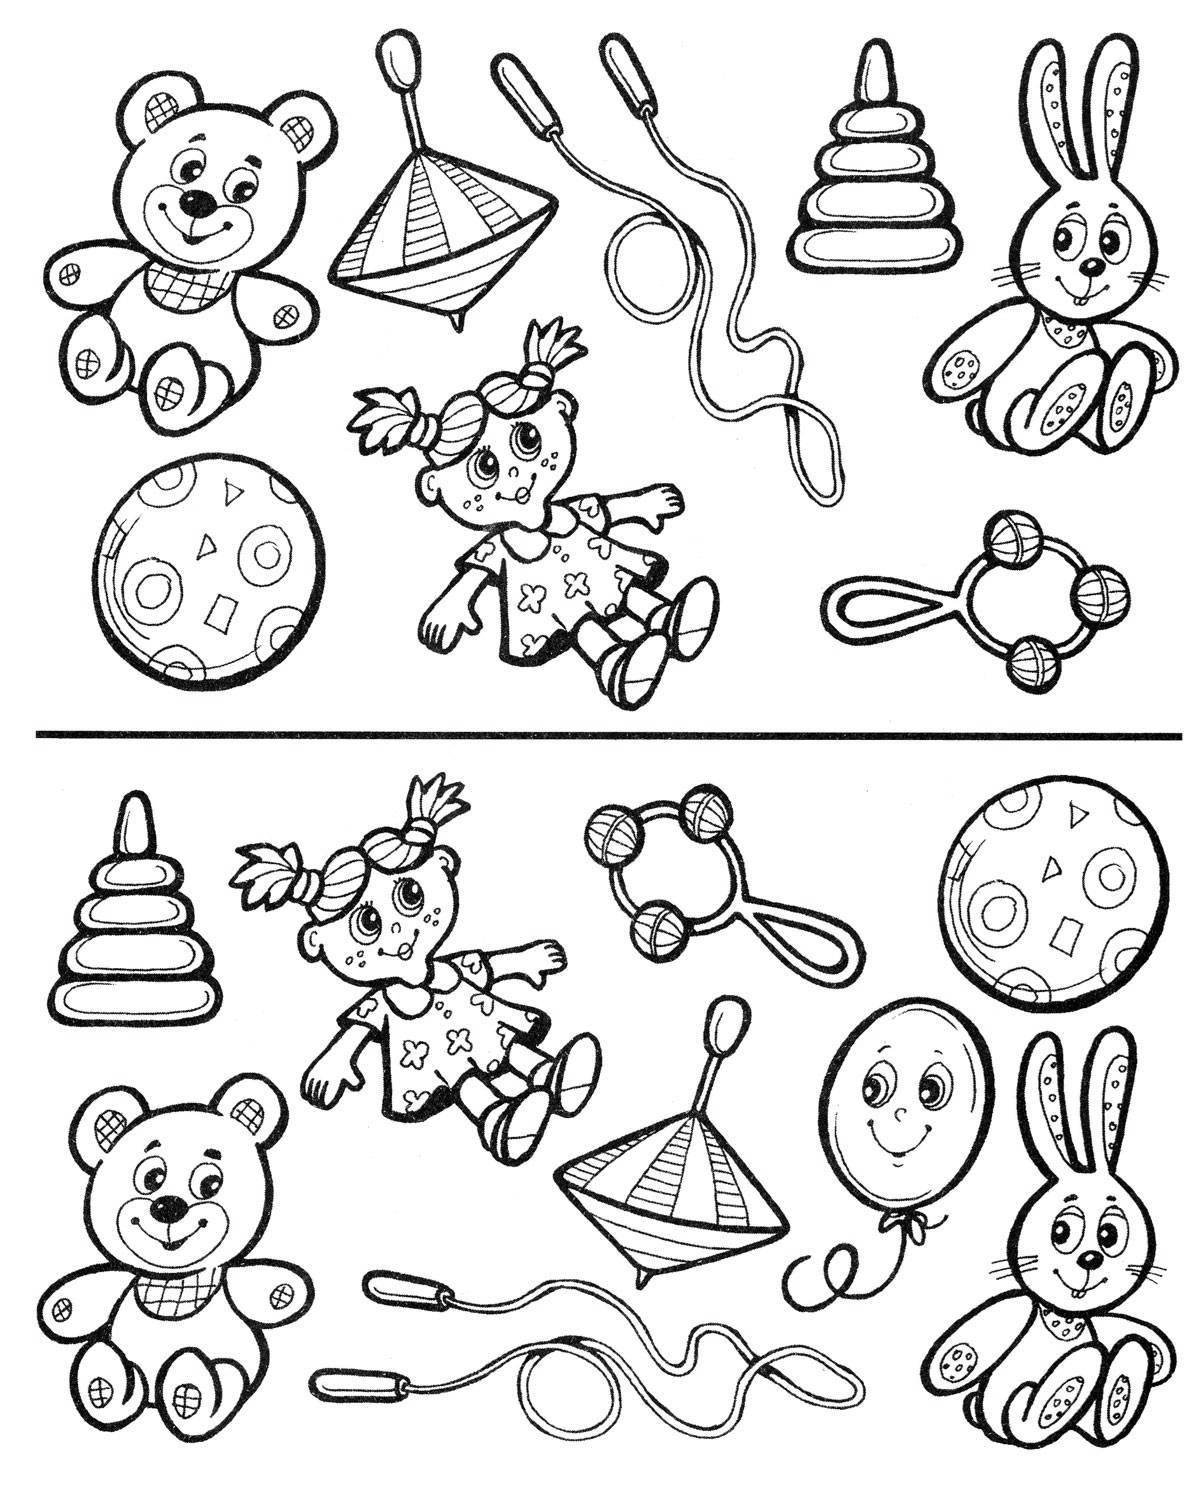 Crazy coloring book for 2 to 3 year olds